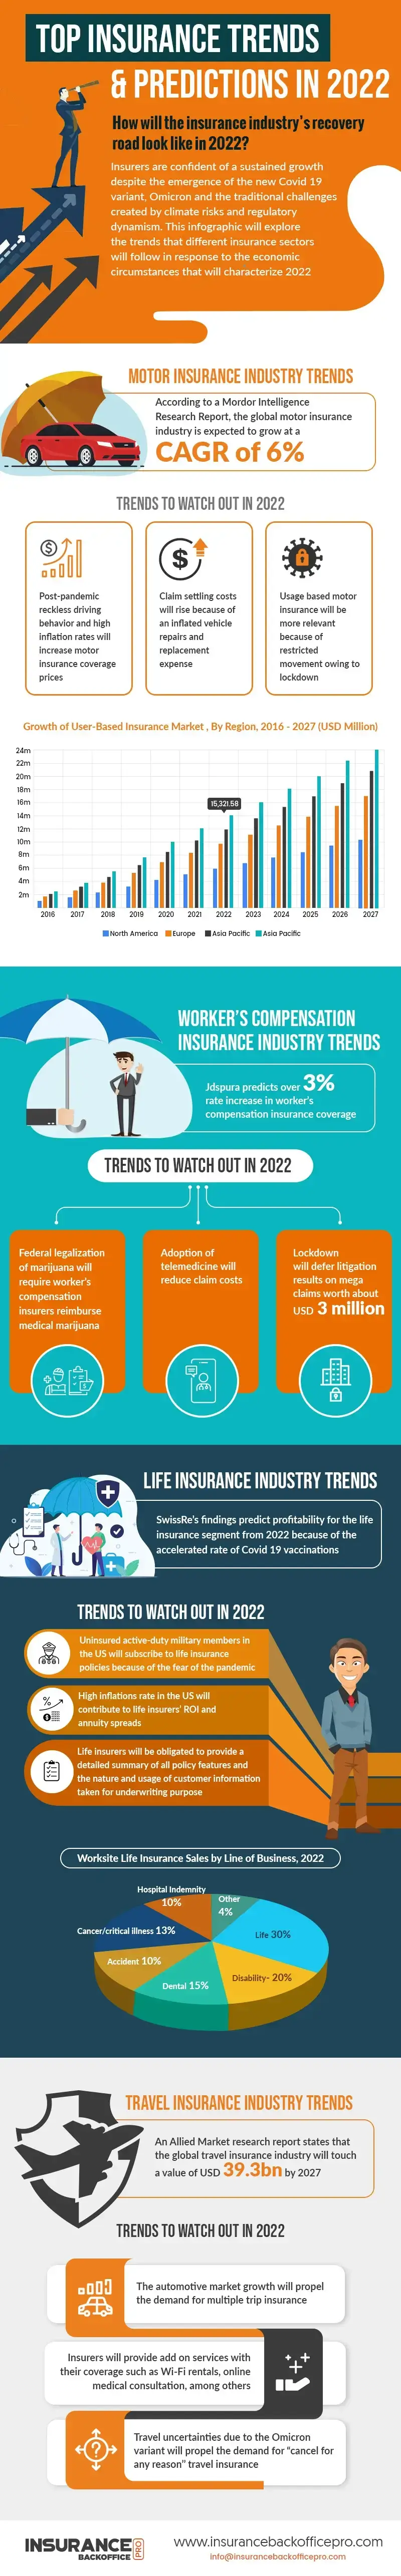 Top Insurance Trends and Predictions in 2022